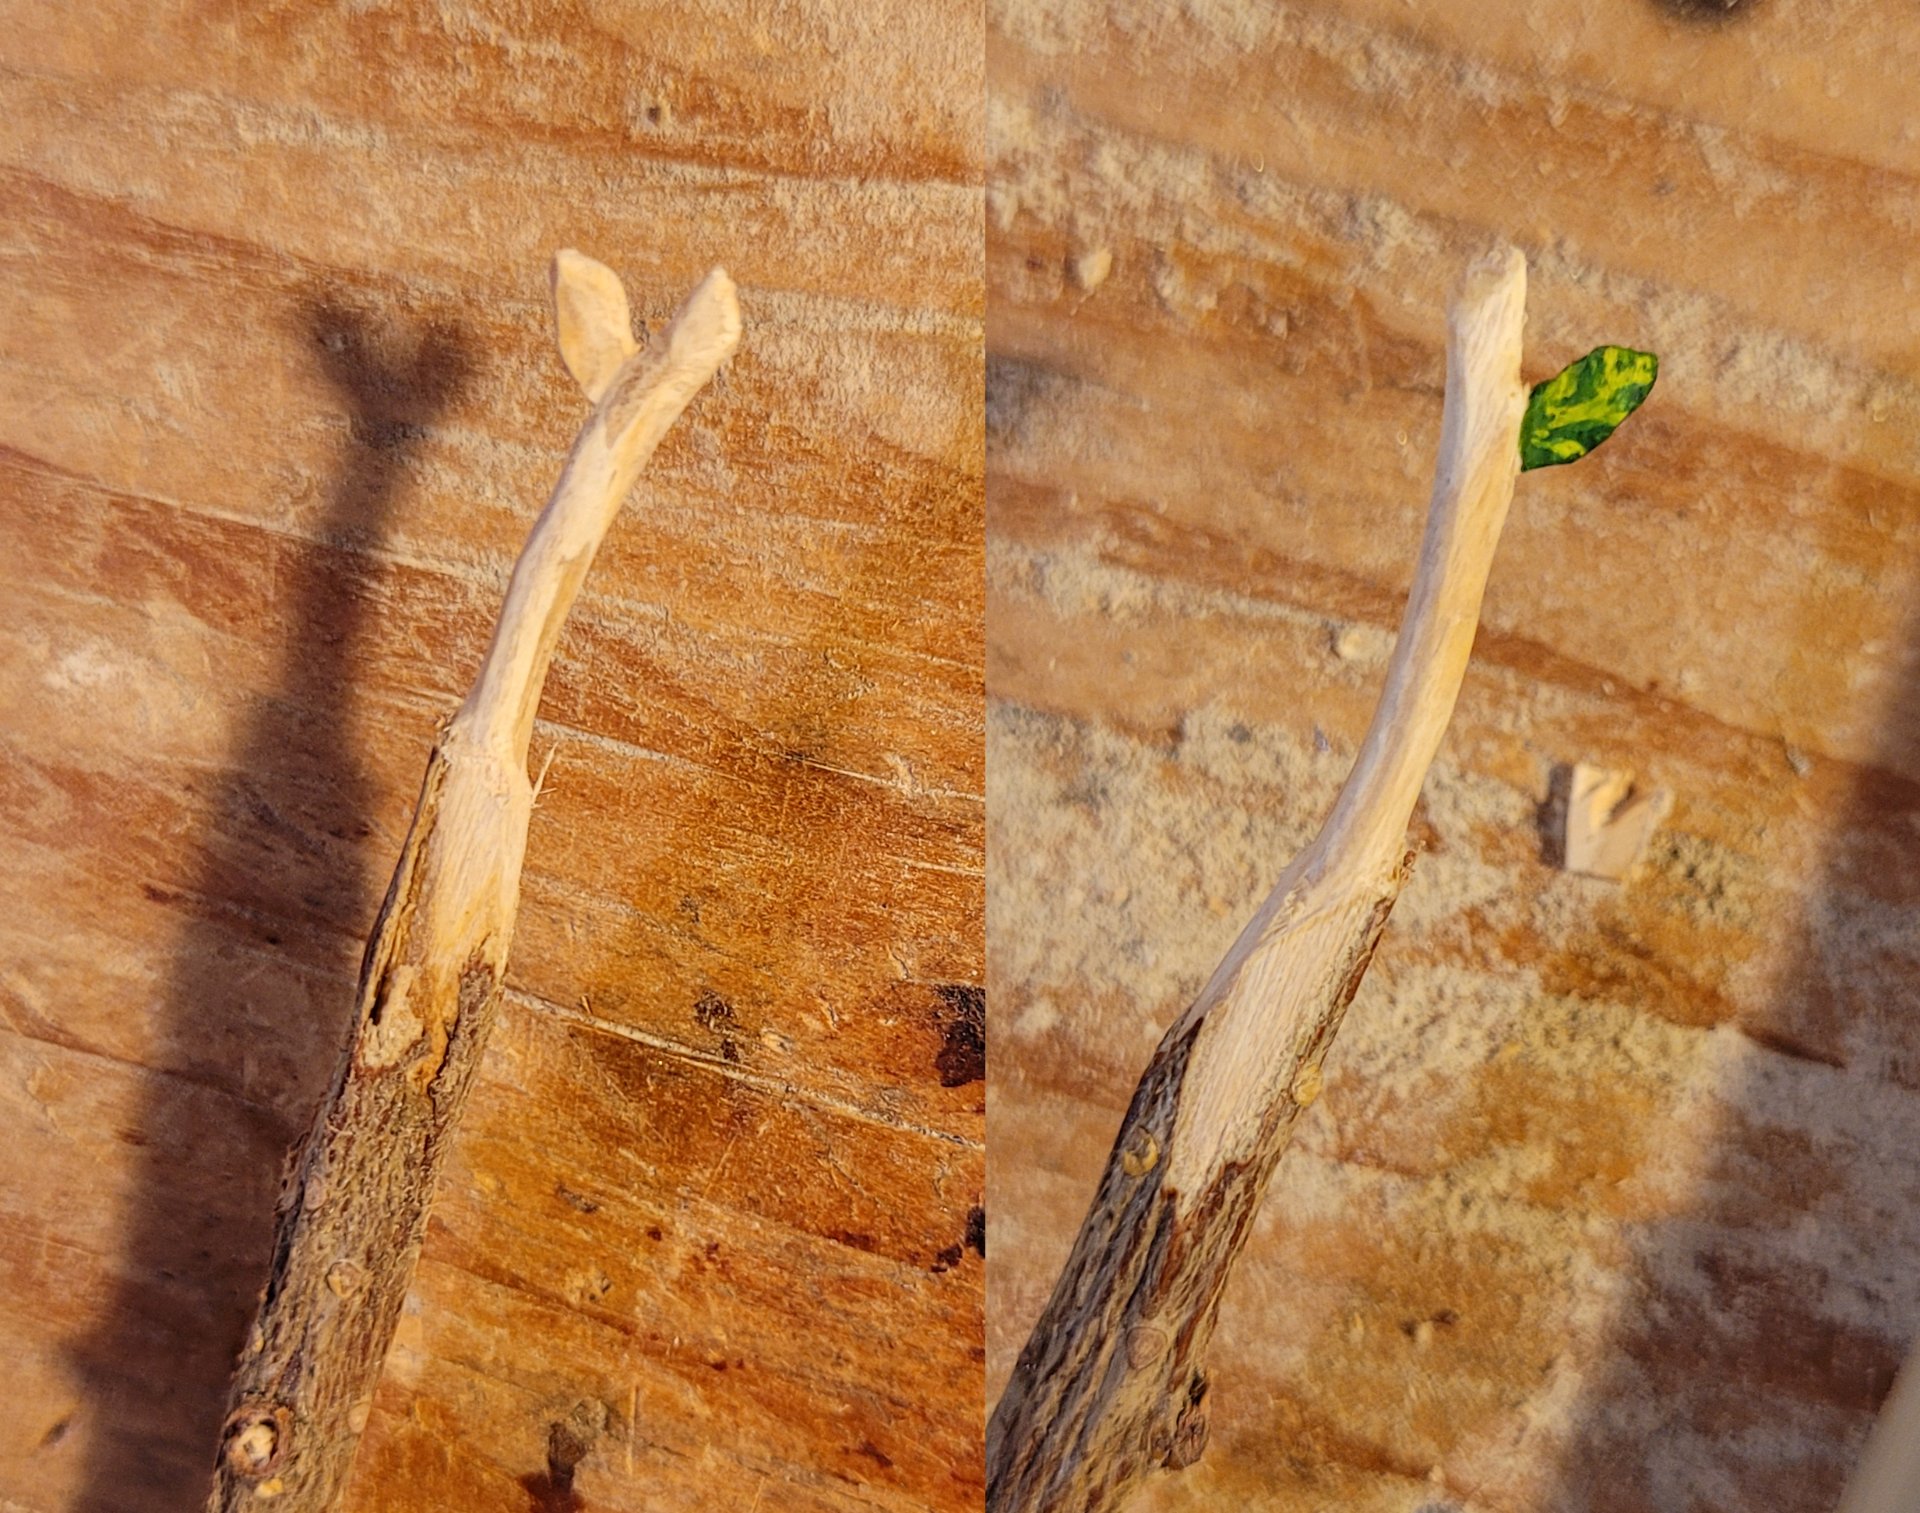 a branch from the christmas tree being carved down to look like a stick with a leaf at the end